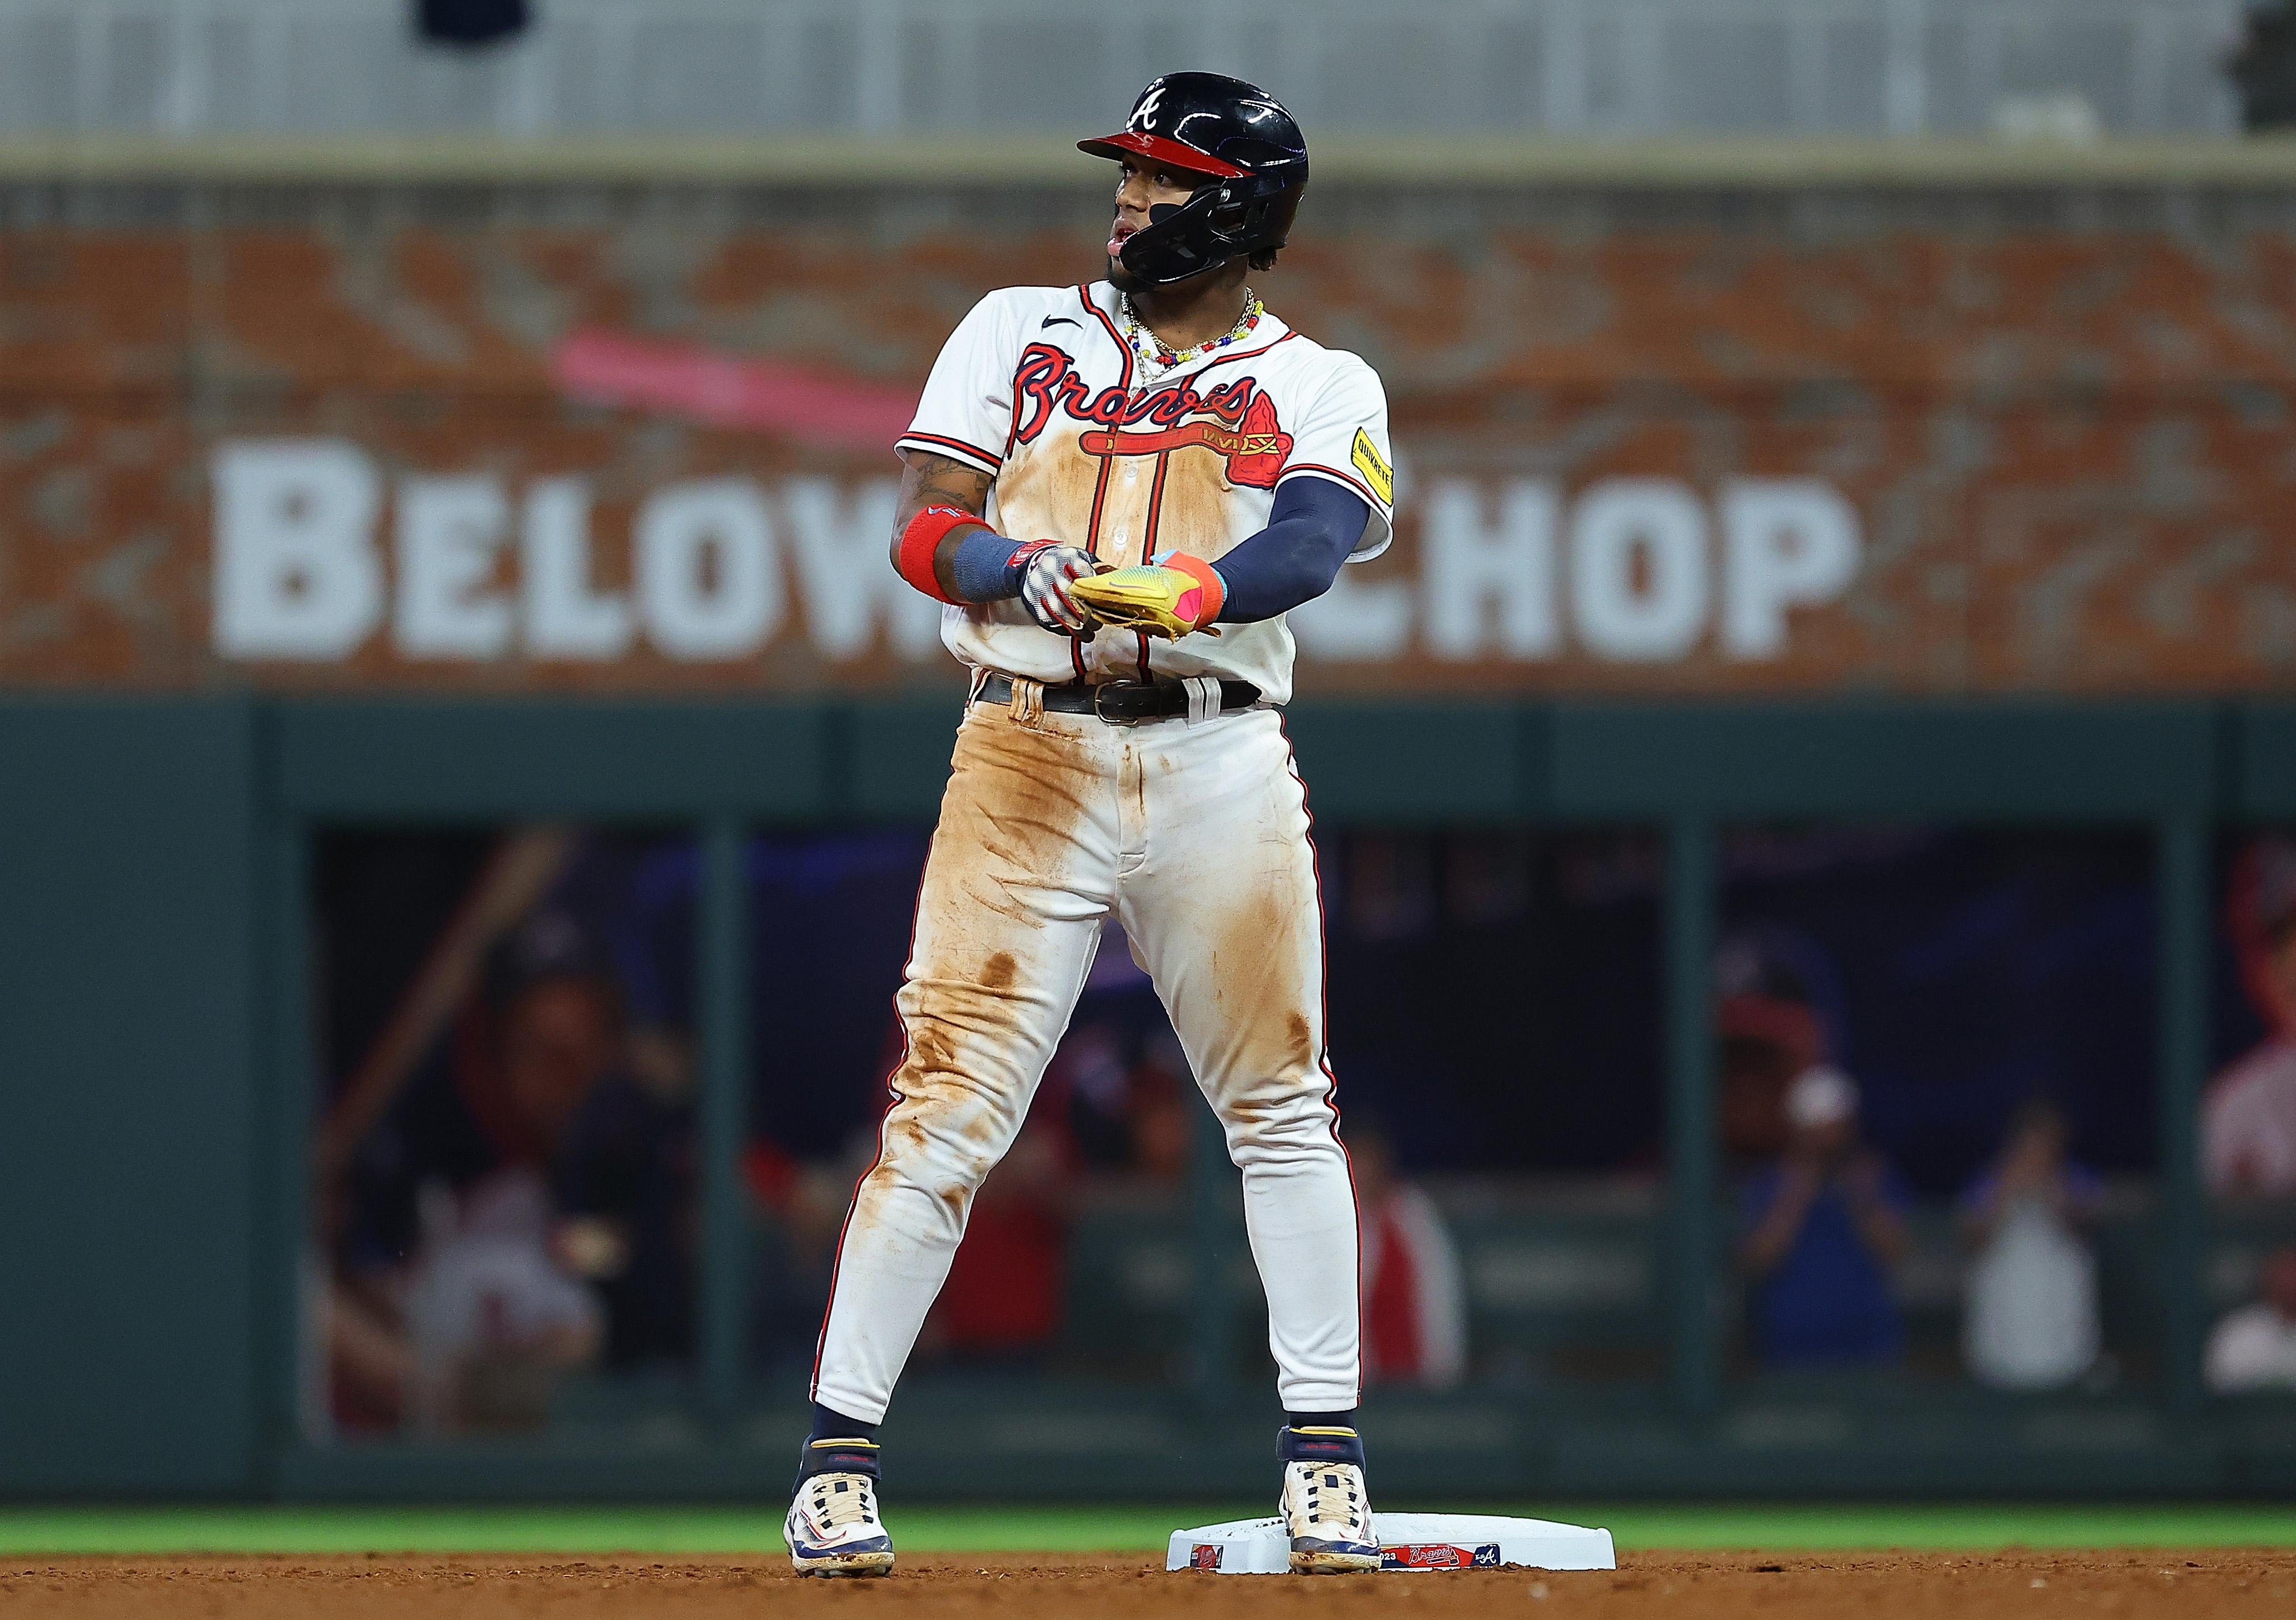 After the Braves Let the Kid Play, Ronald Acuña Jr. Soared - The